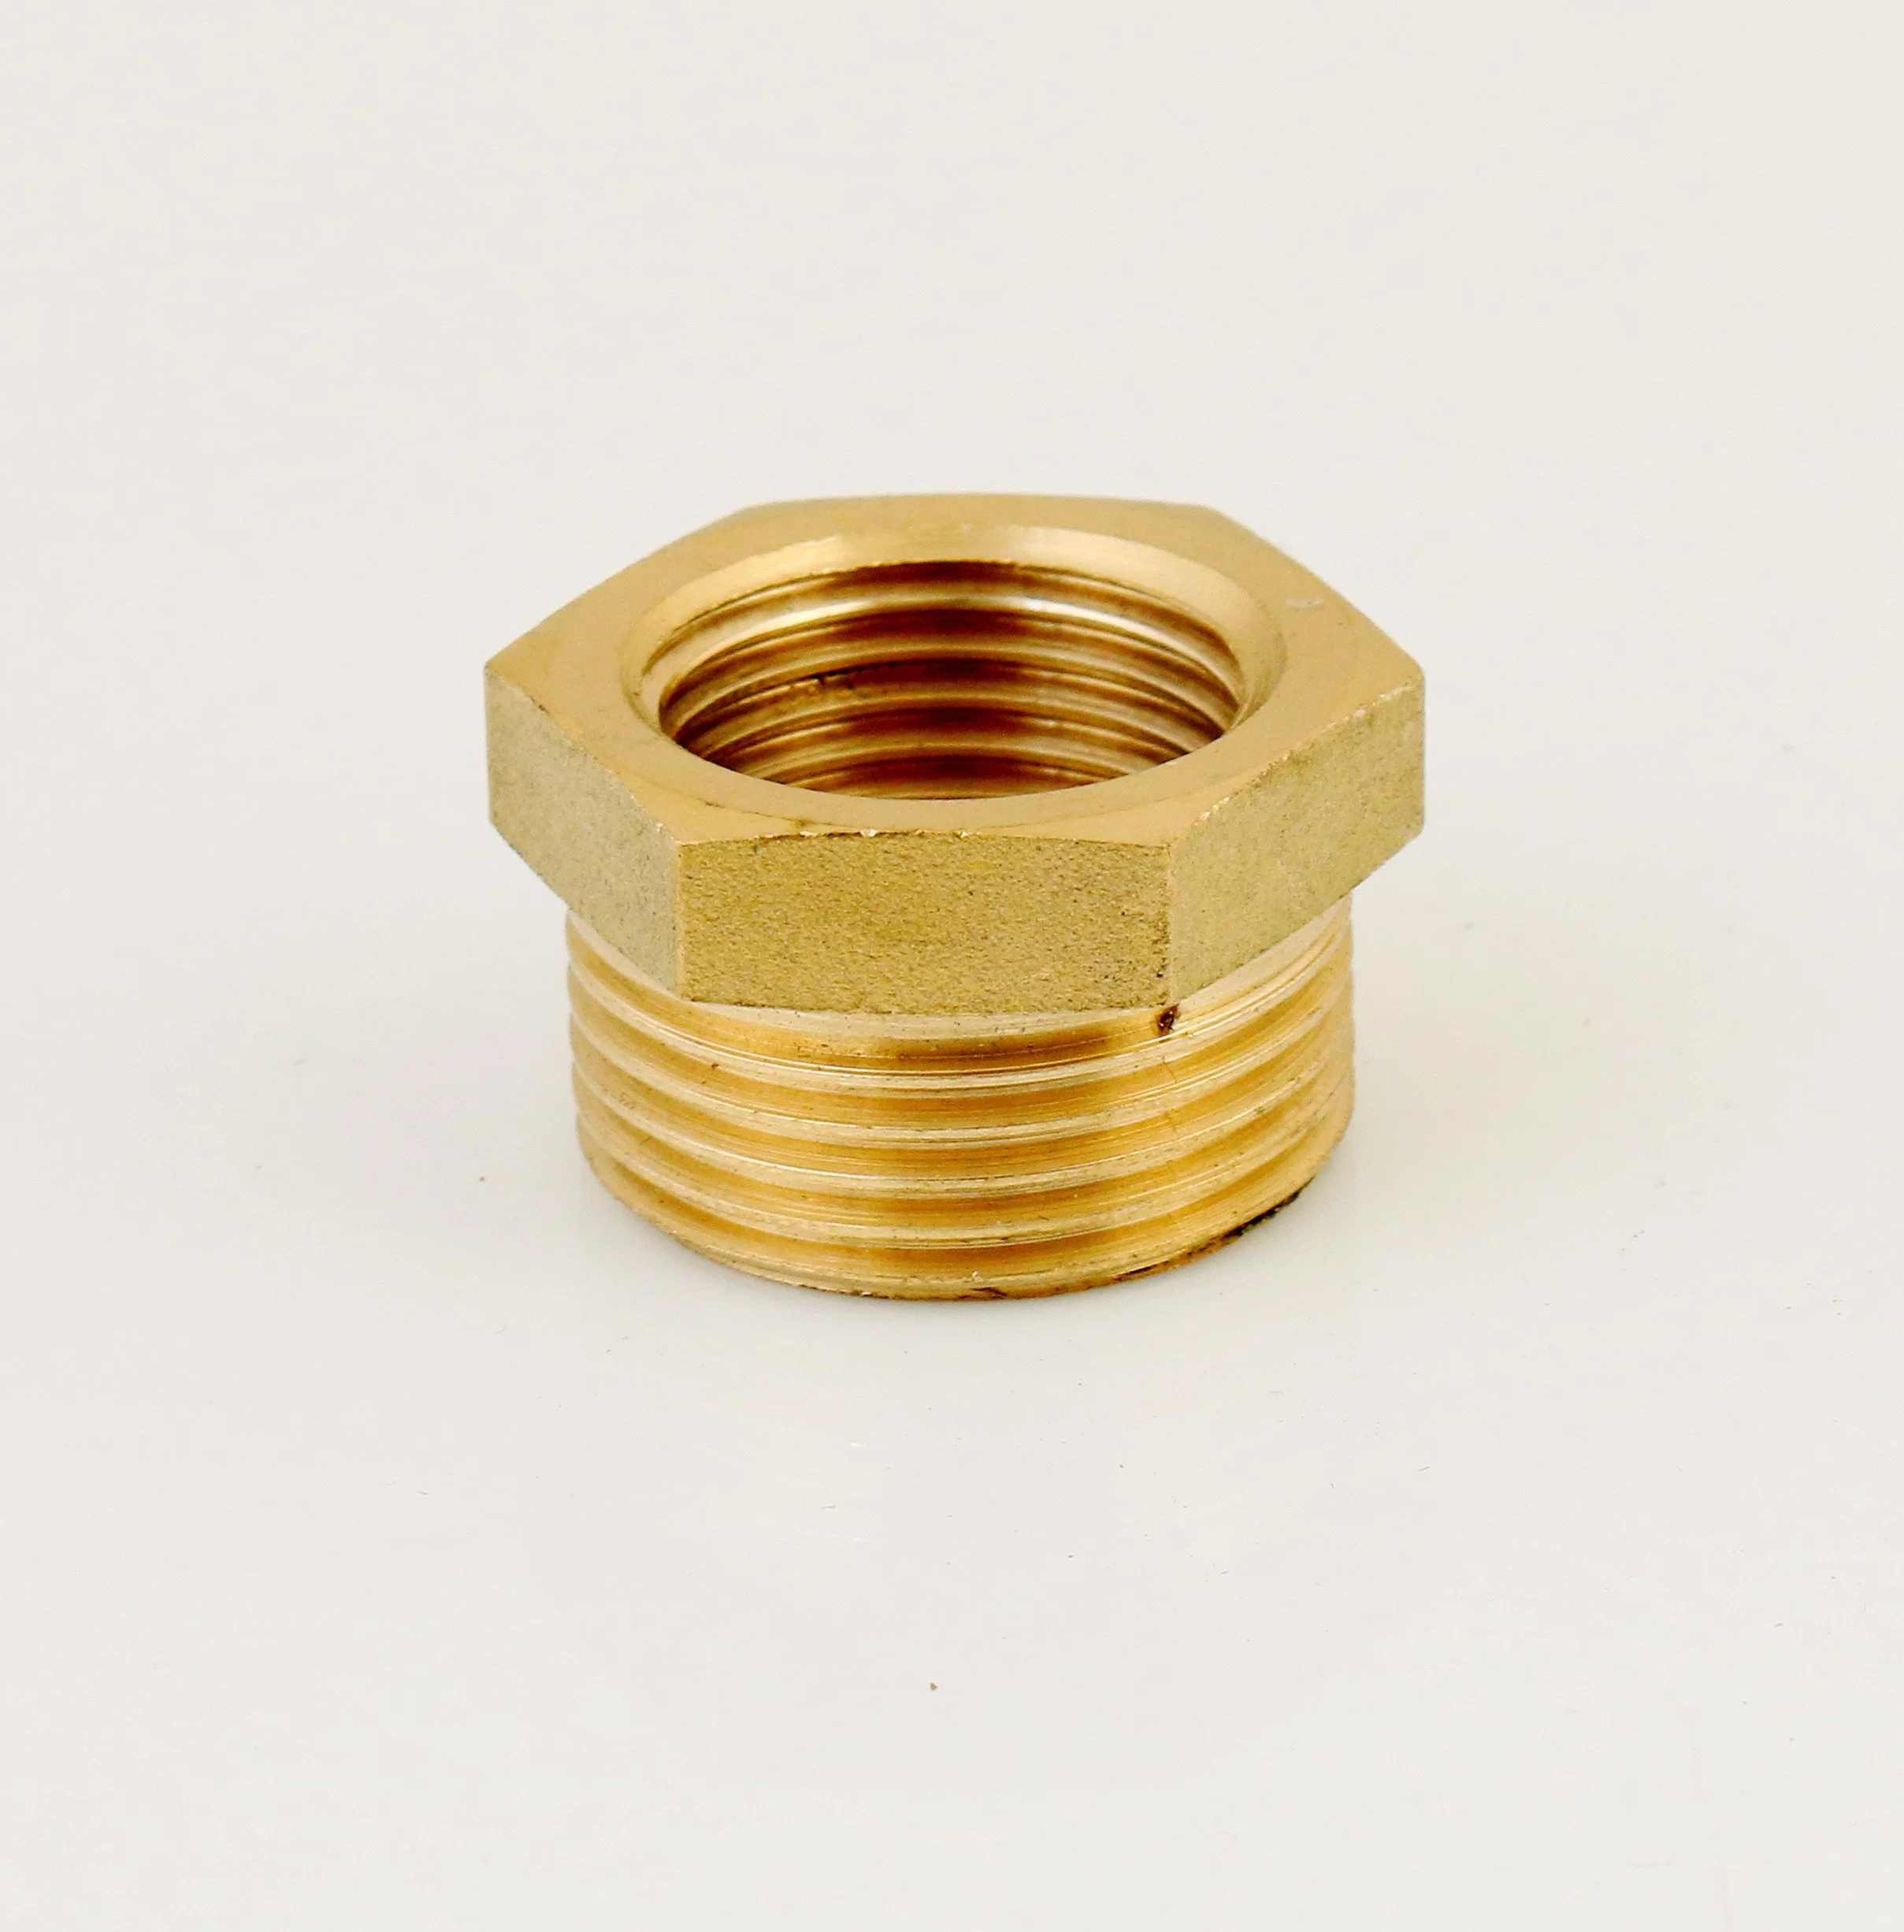 Brass Adapter Fitting Bsp Reducing Hexagon Bush Bushing Male to Female Connector Fuel Water Gas Oil 1/8" 1/4" 3/8" 1/2" 3/4" 1"